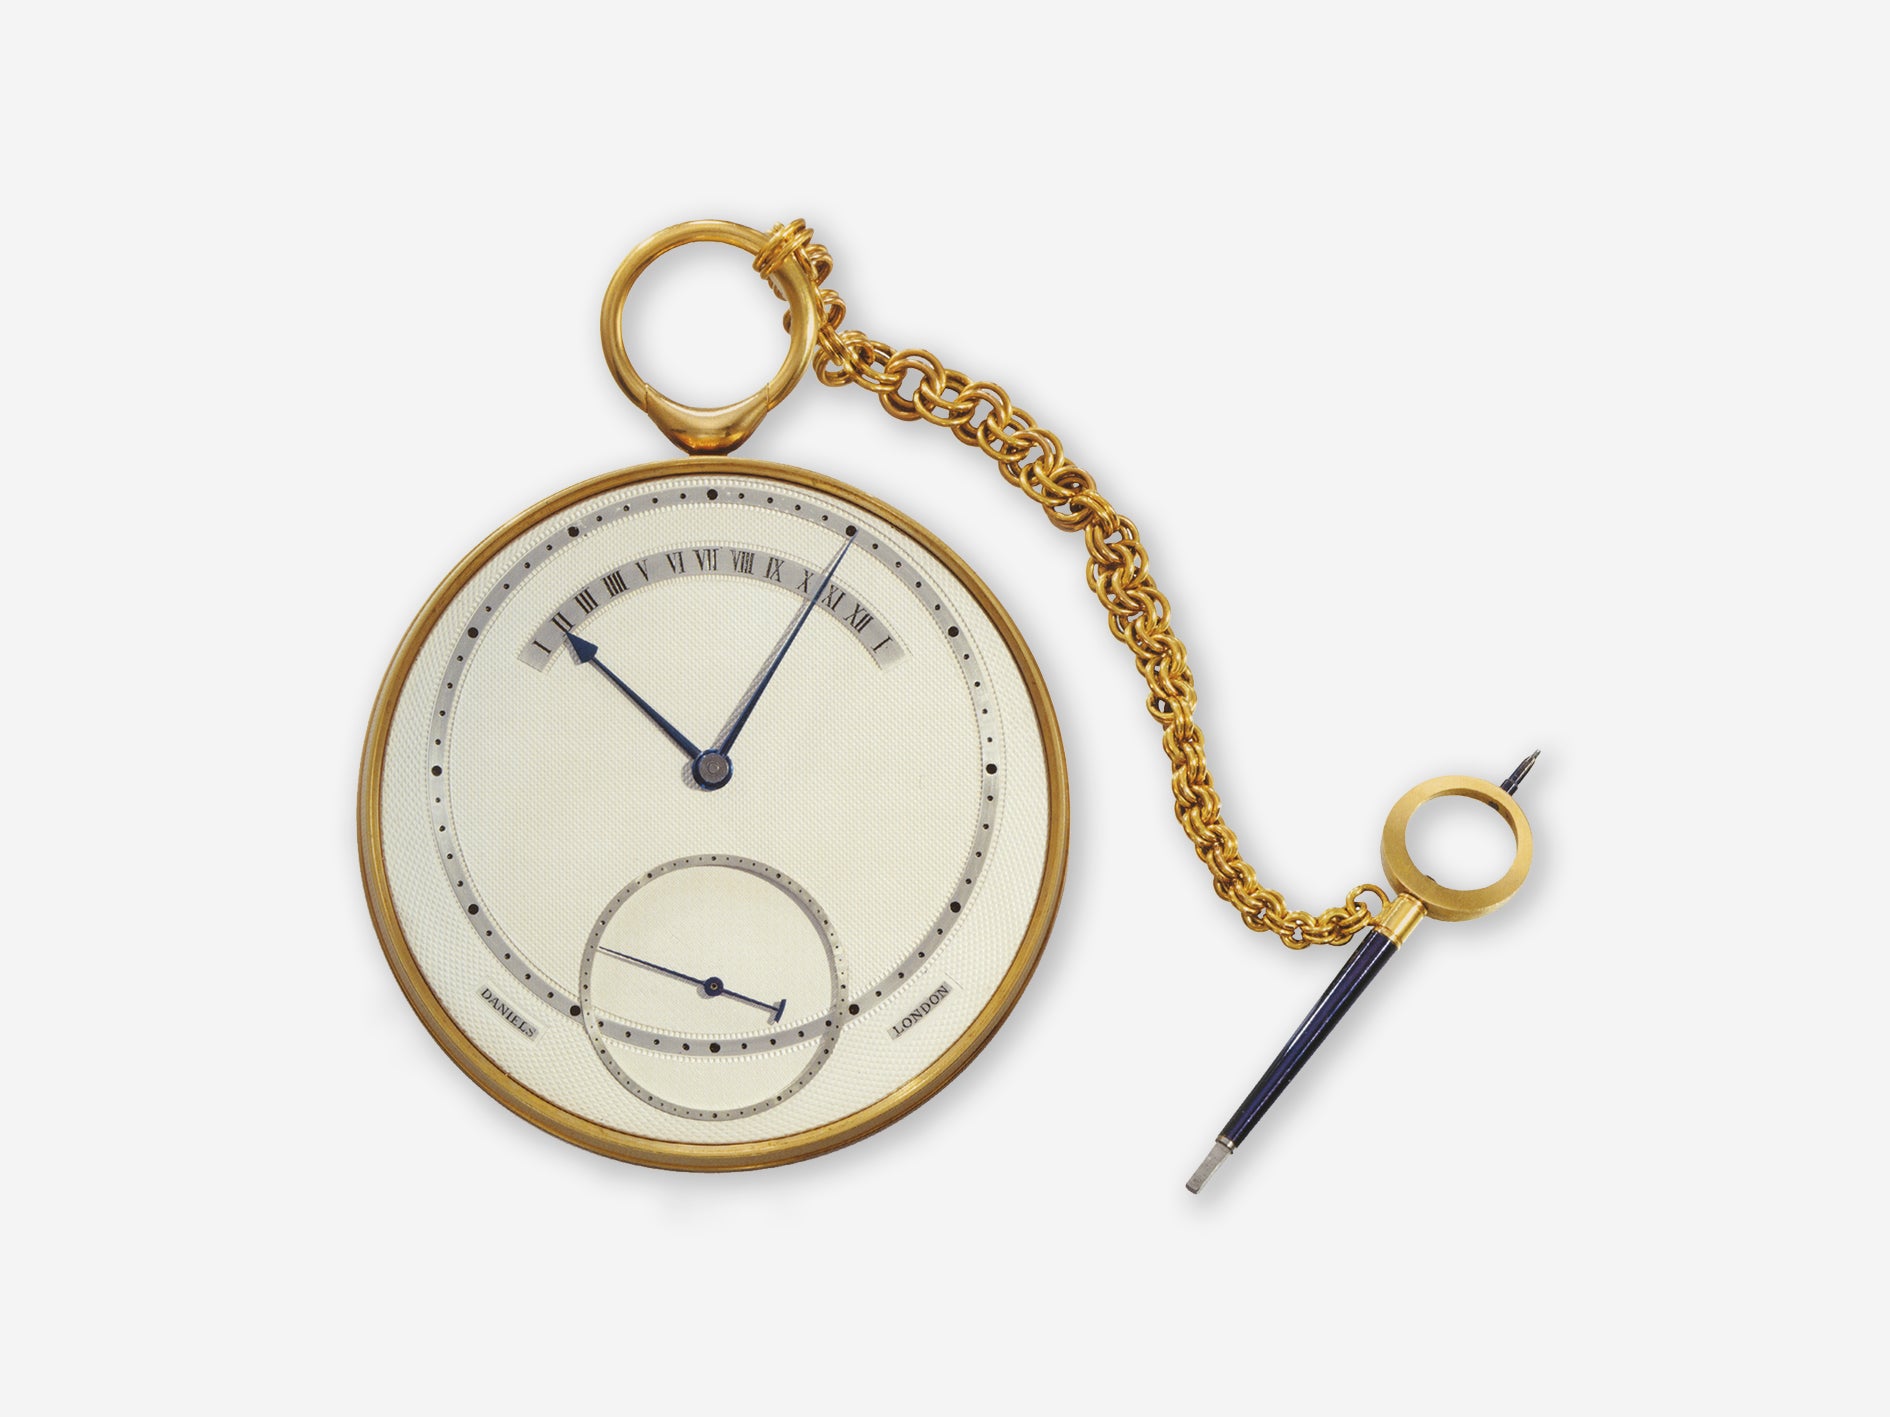 Pocket watch made by George Daniels for Sit Cecil Clutton containing a tourbillon